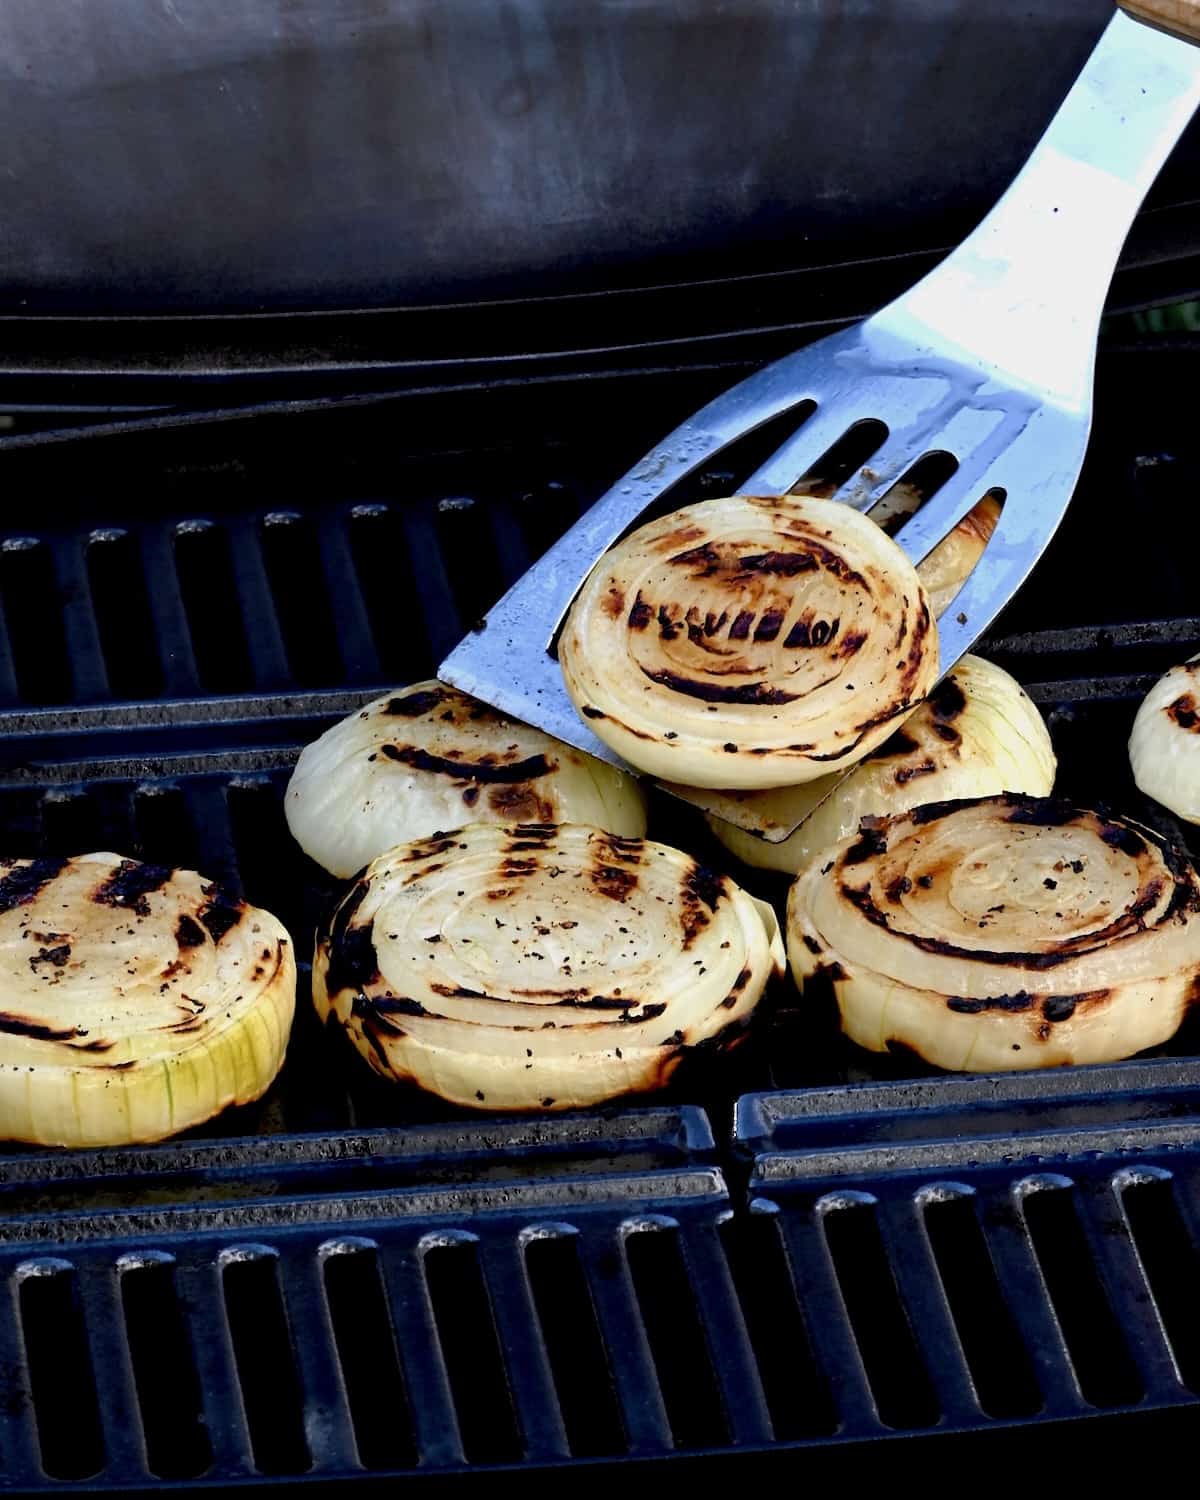 Removing onions from the grill